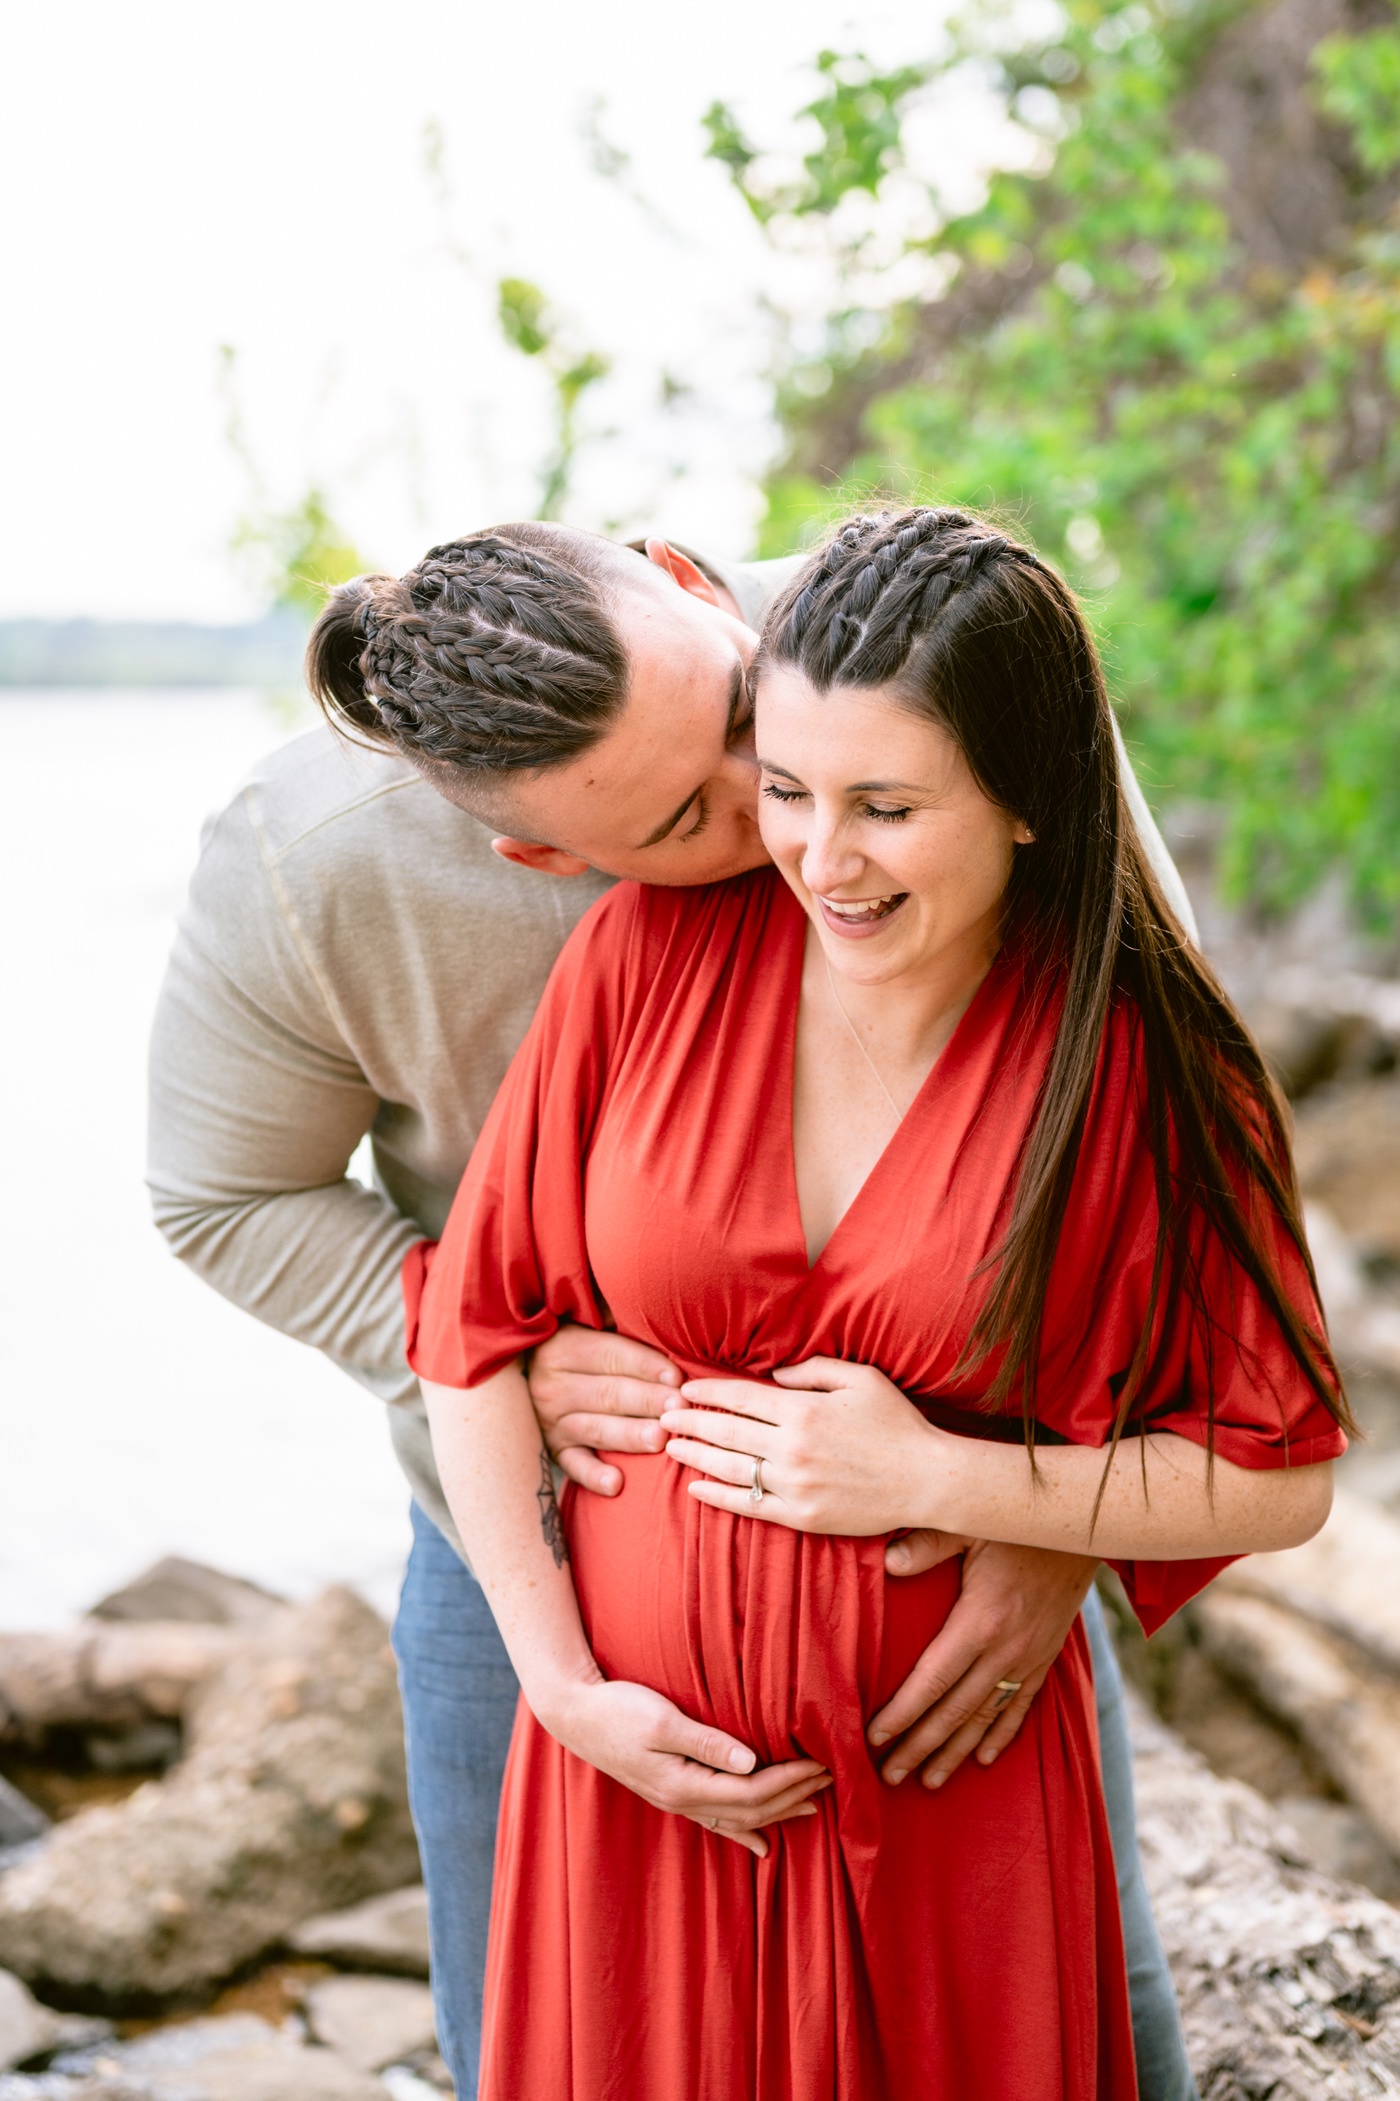 Virginia Maternity Photographer, Virginia Family Session, VA Mom to Be, Spring Maternity Session in Jones Point Park, Alexandria Maternity Session, red maternity dress, unique hair style